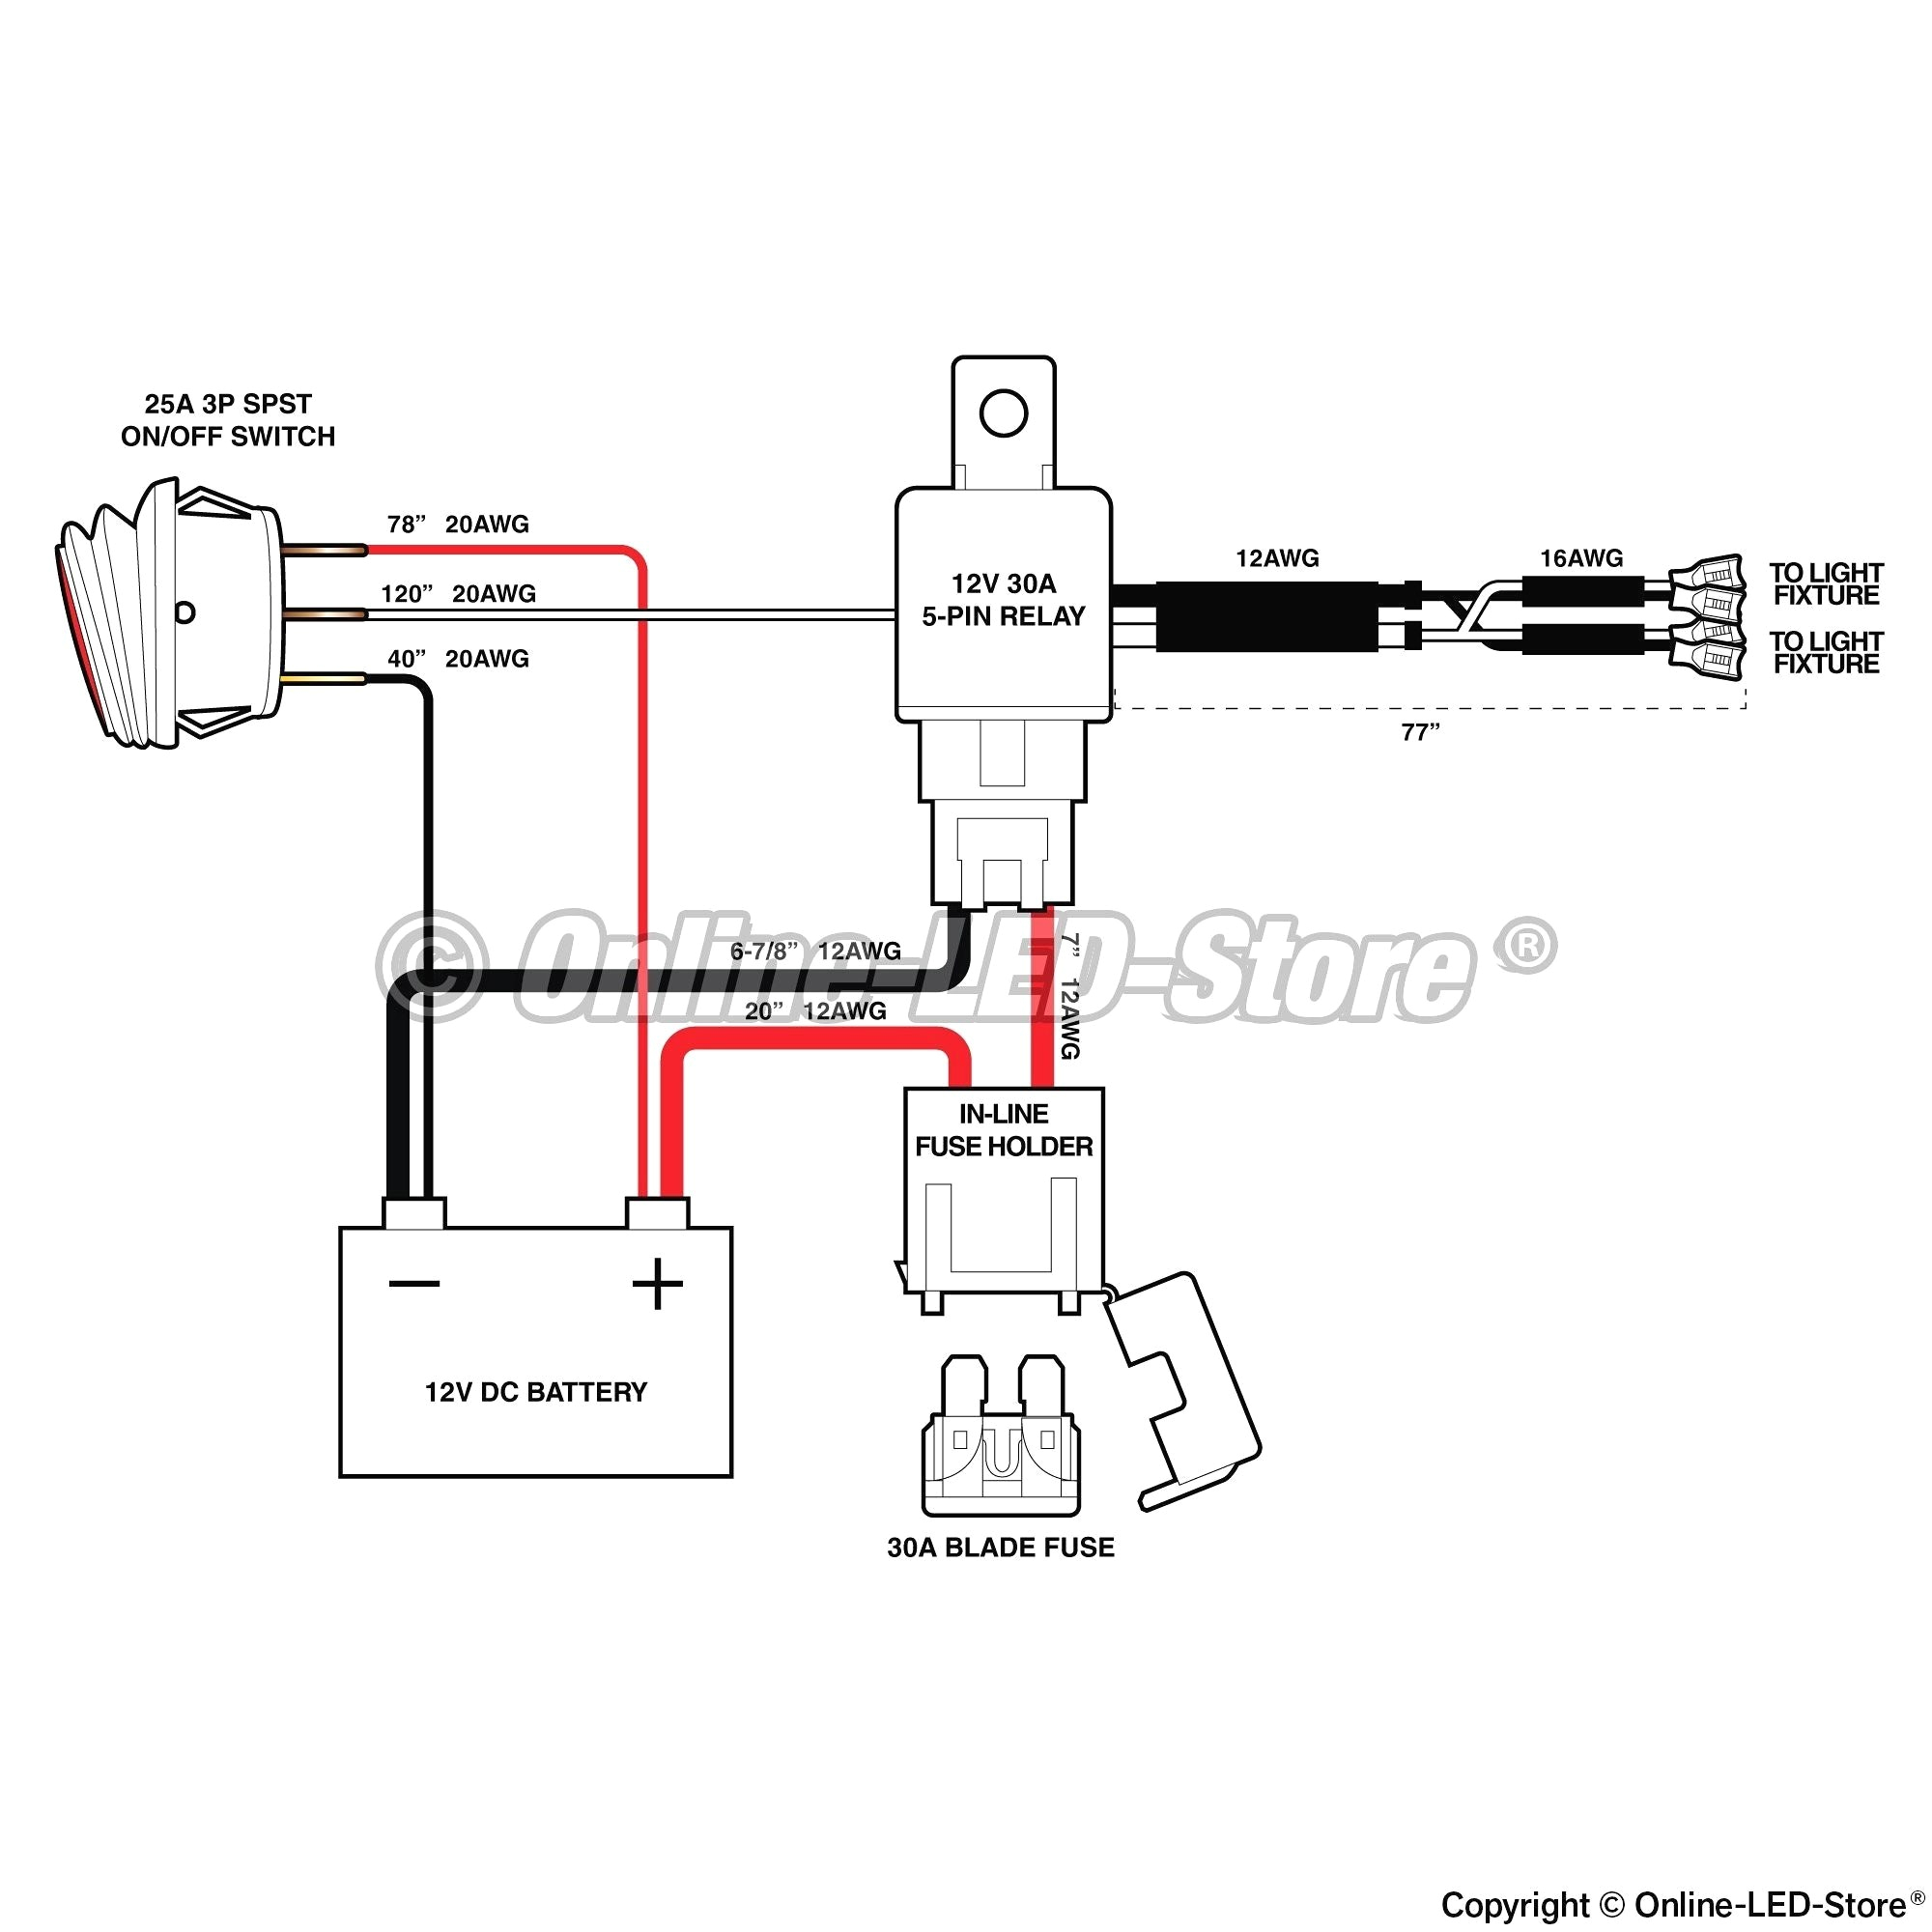 on off on toggle switch wiring diagram wiring diagram relay f road lights inspirationa fresh how to wire a f toggle switch diagram diagram 19d jpg